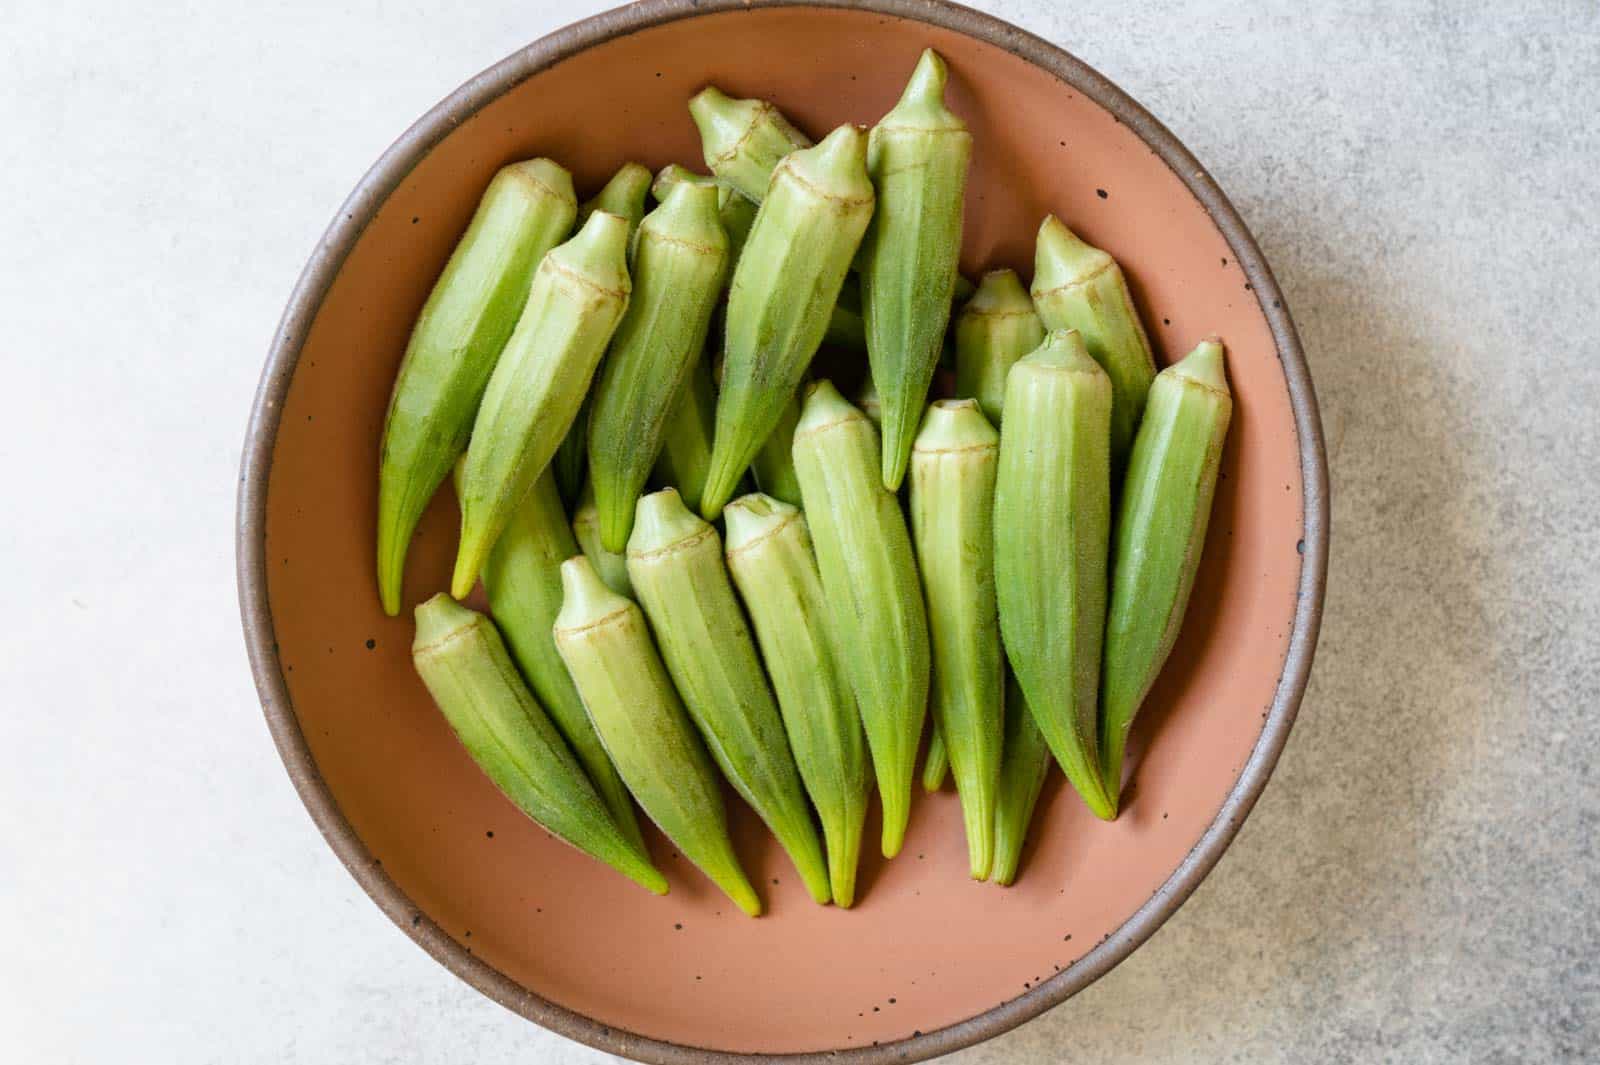 Okra in a bowl for July produce guide